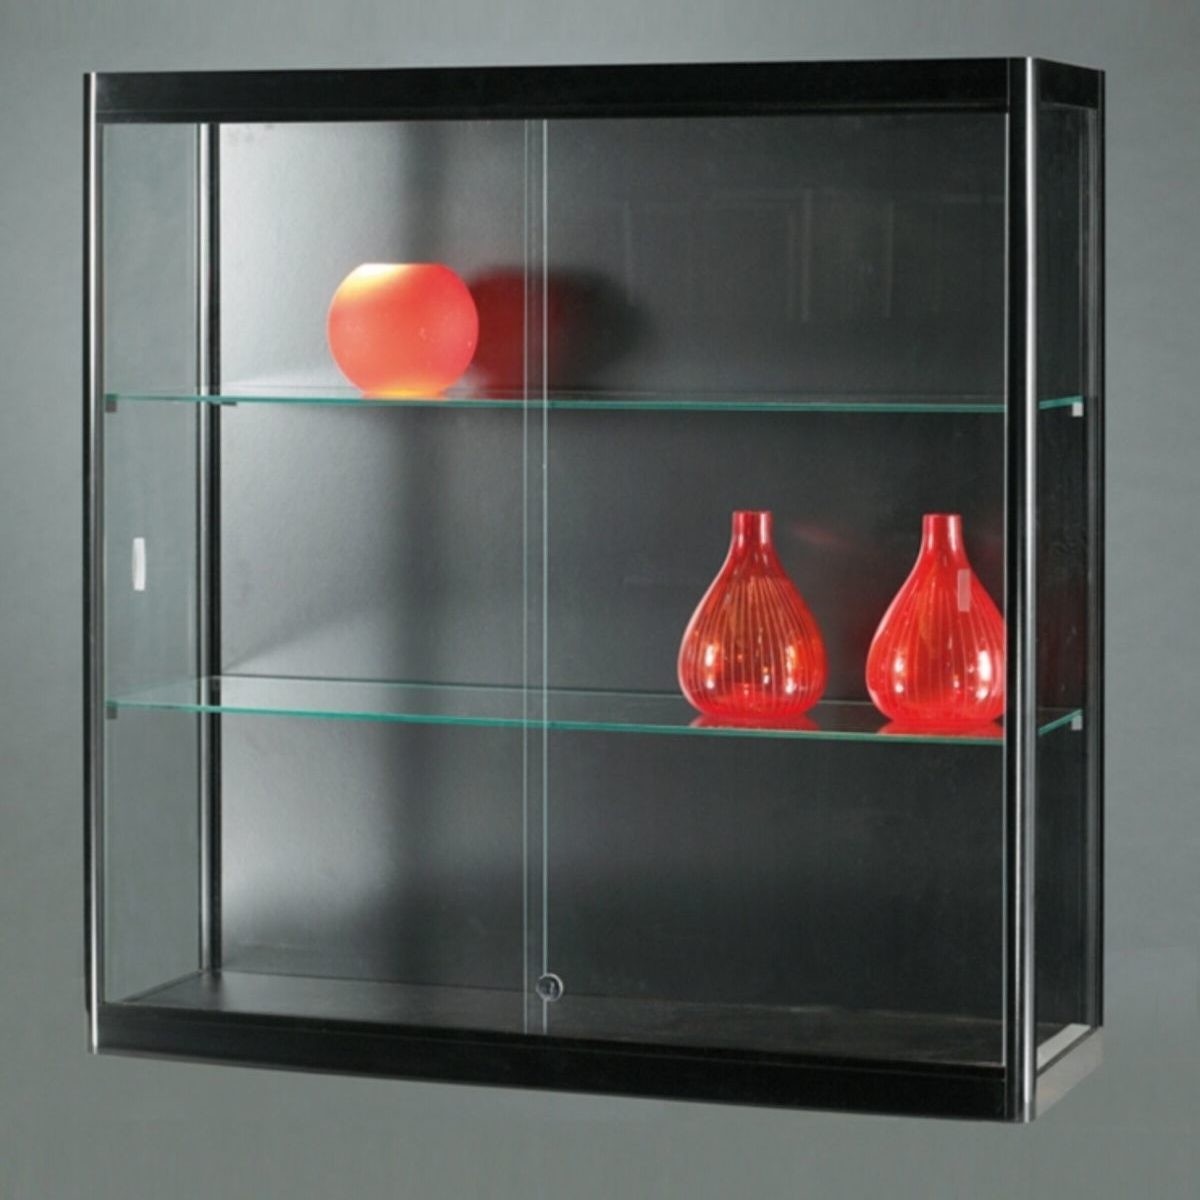 Details about glass wall mounted display cabinet 2 adjustable